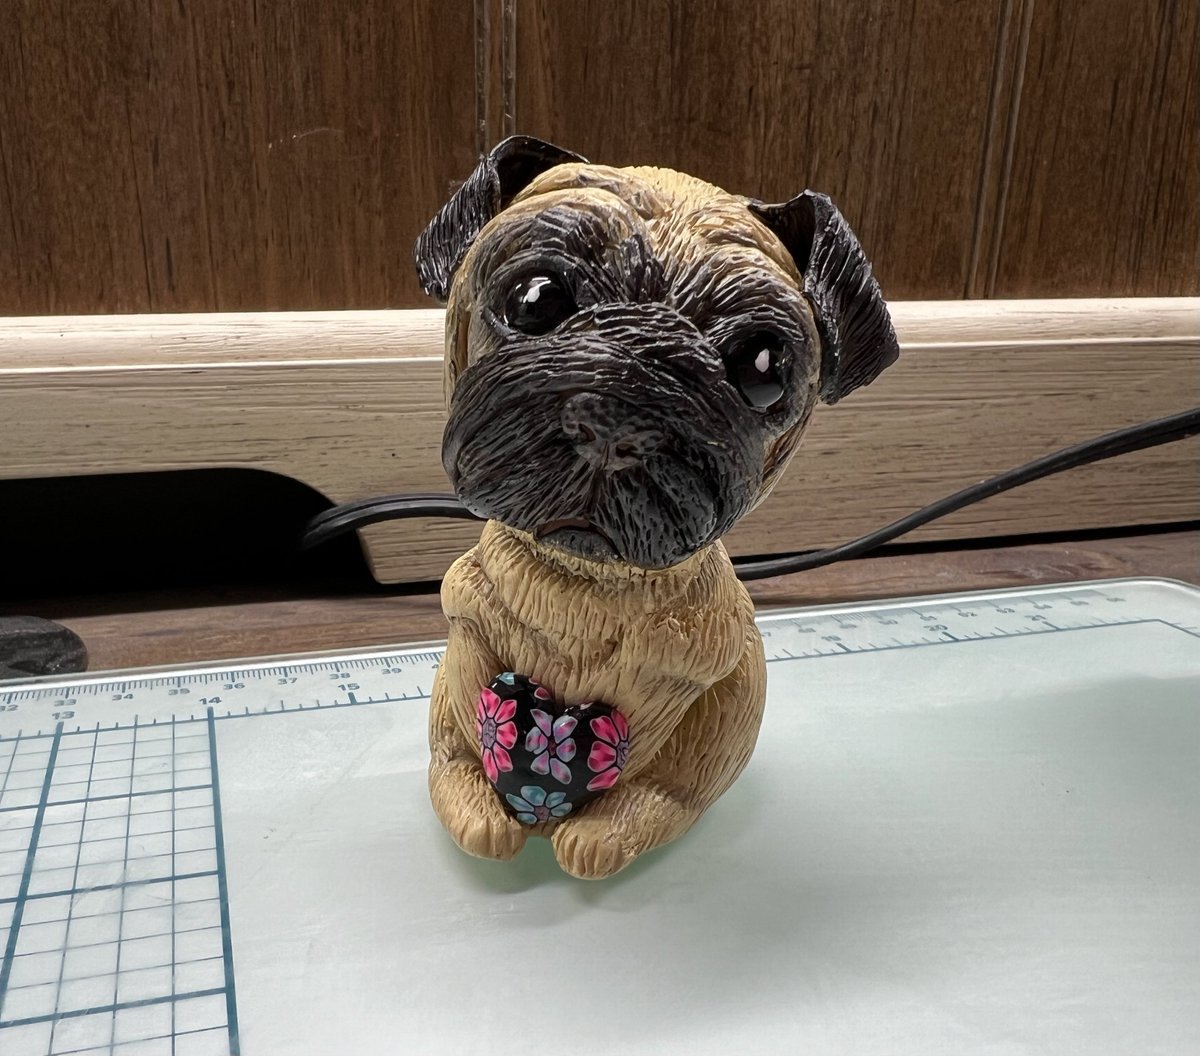 Looky at this little cutie! We helped momma make it in her studio!😍🥰🥳🐾😘
#TurboTugandTink